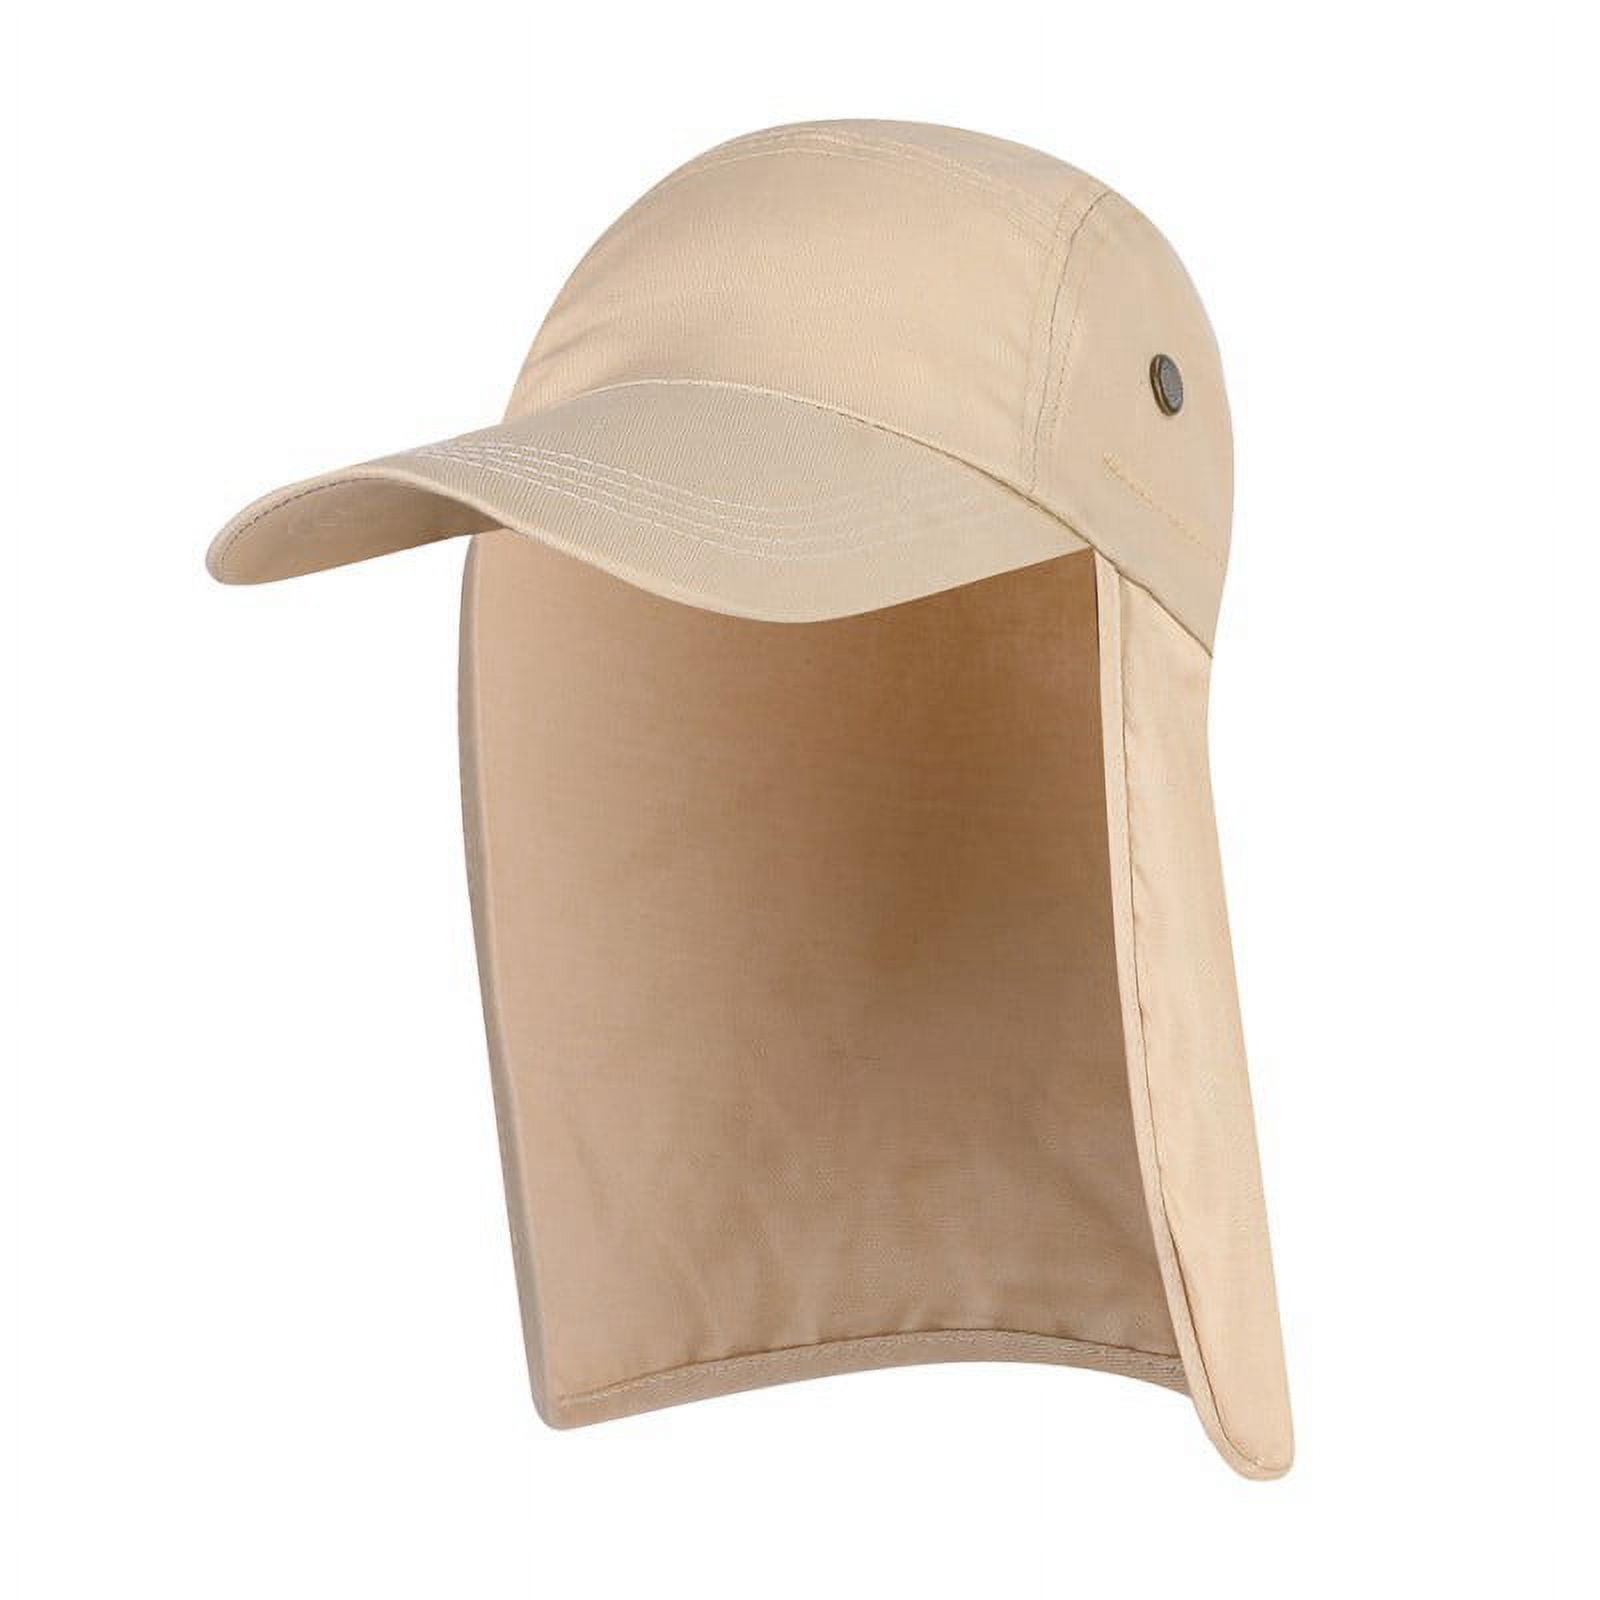 Outdoor Waterproof Sunshade Fishing Cap with Ear Neck Flap Cover Sports Hat